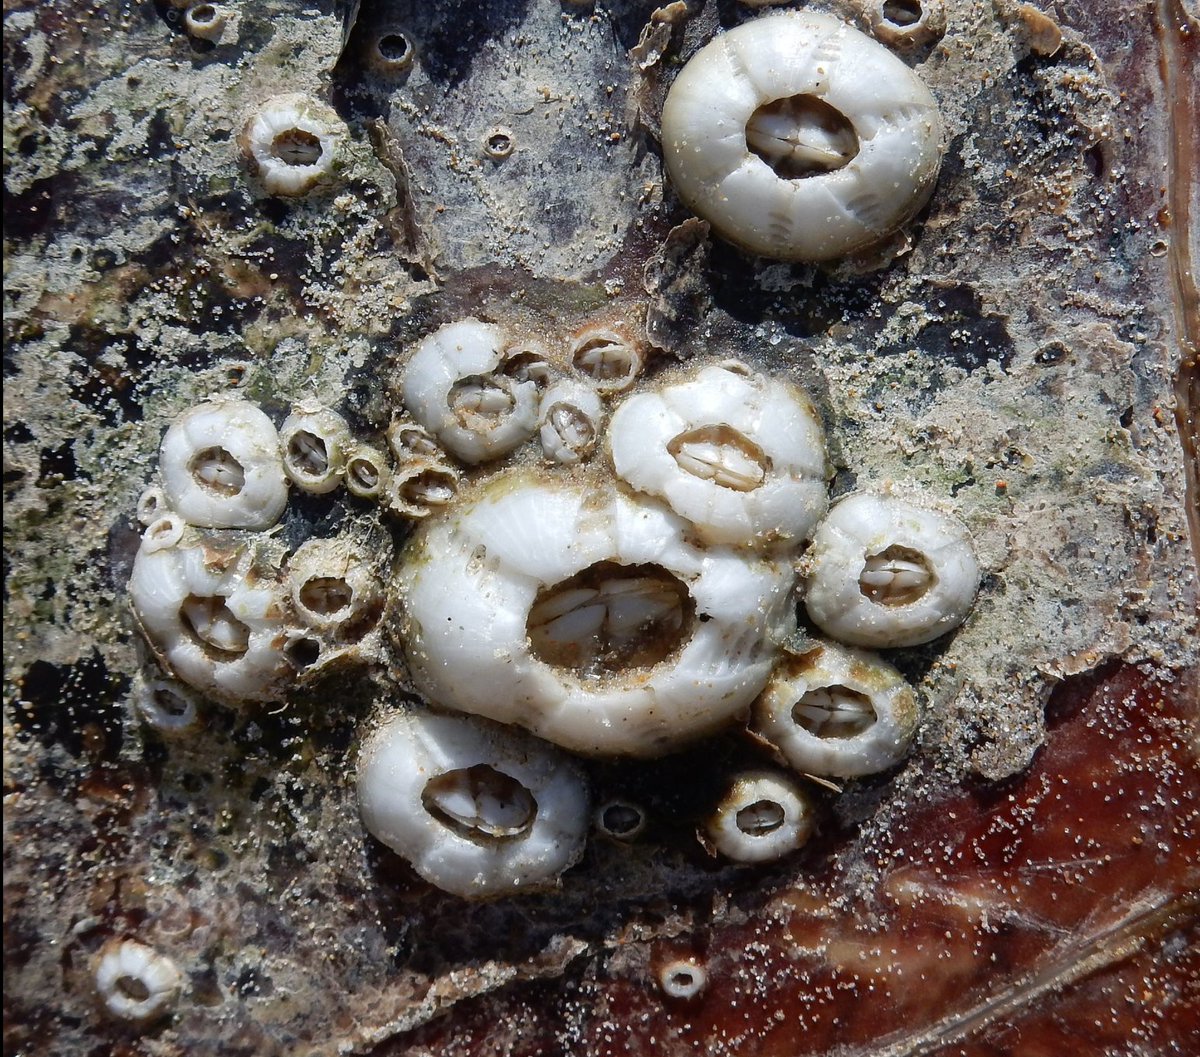 THERE ARE EVEN TURTLE BARNACLES. Whole species of barnacles that only live on turtles. Barnacles, you see, actually run everything. The ocean is actually just a bunch of stuff barnacles can live on. pic:  https://bit.ly/3itmTsl 